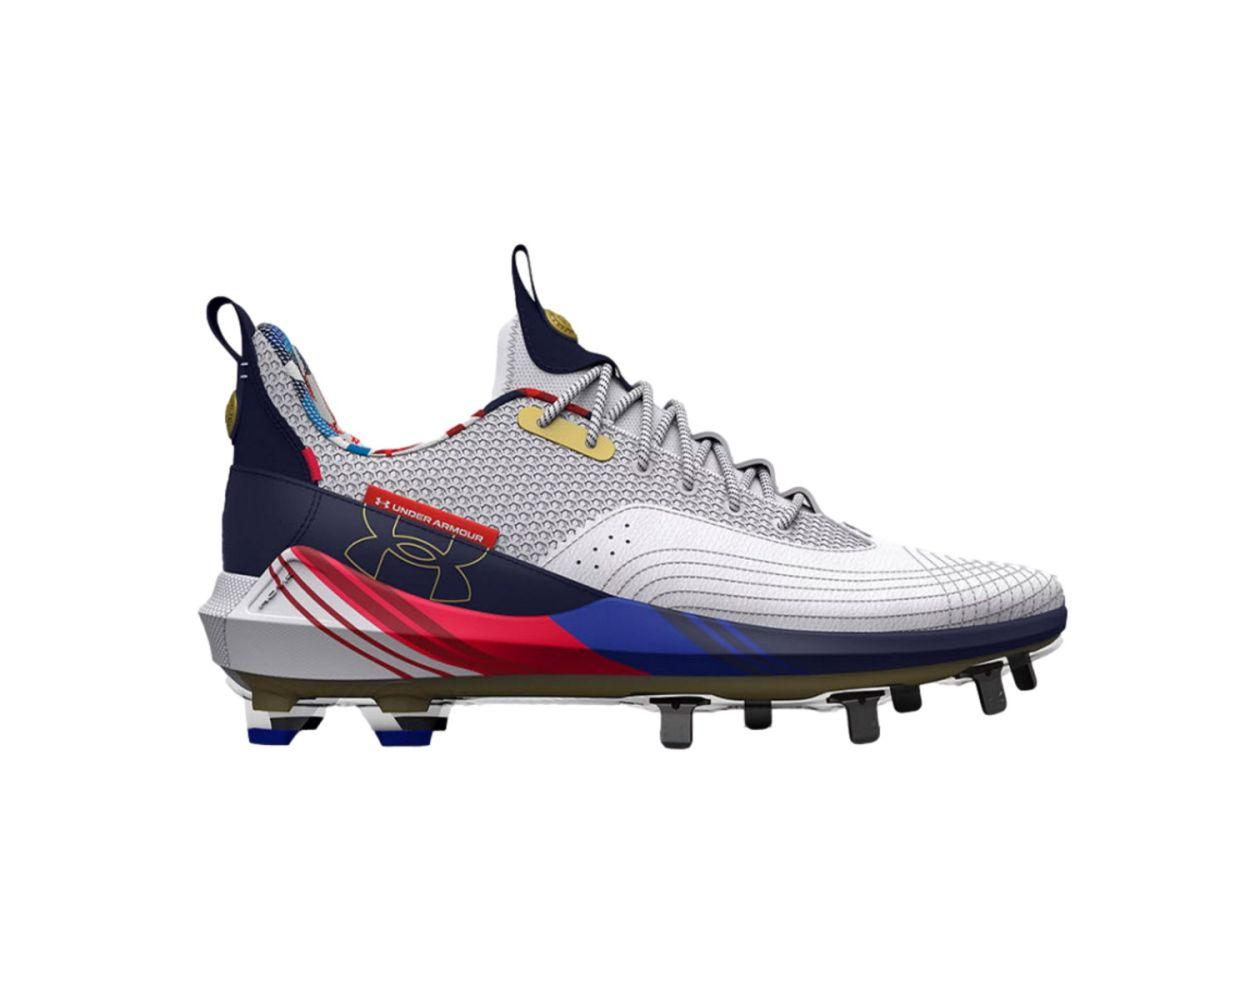 Under Armour Men's Harper 7 Low St USA Baseball Cleats - White, 11.5